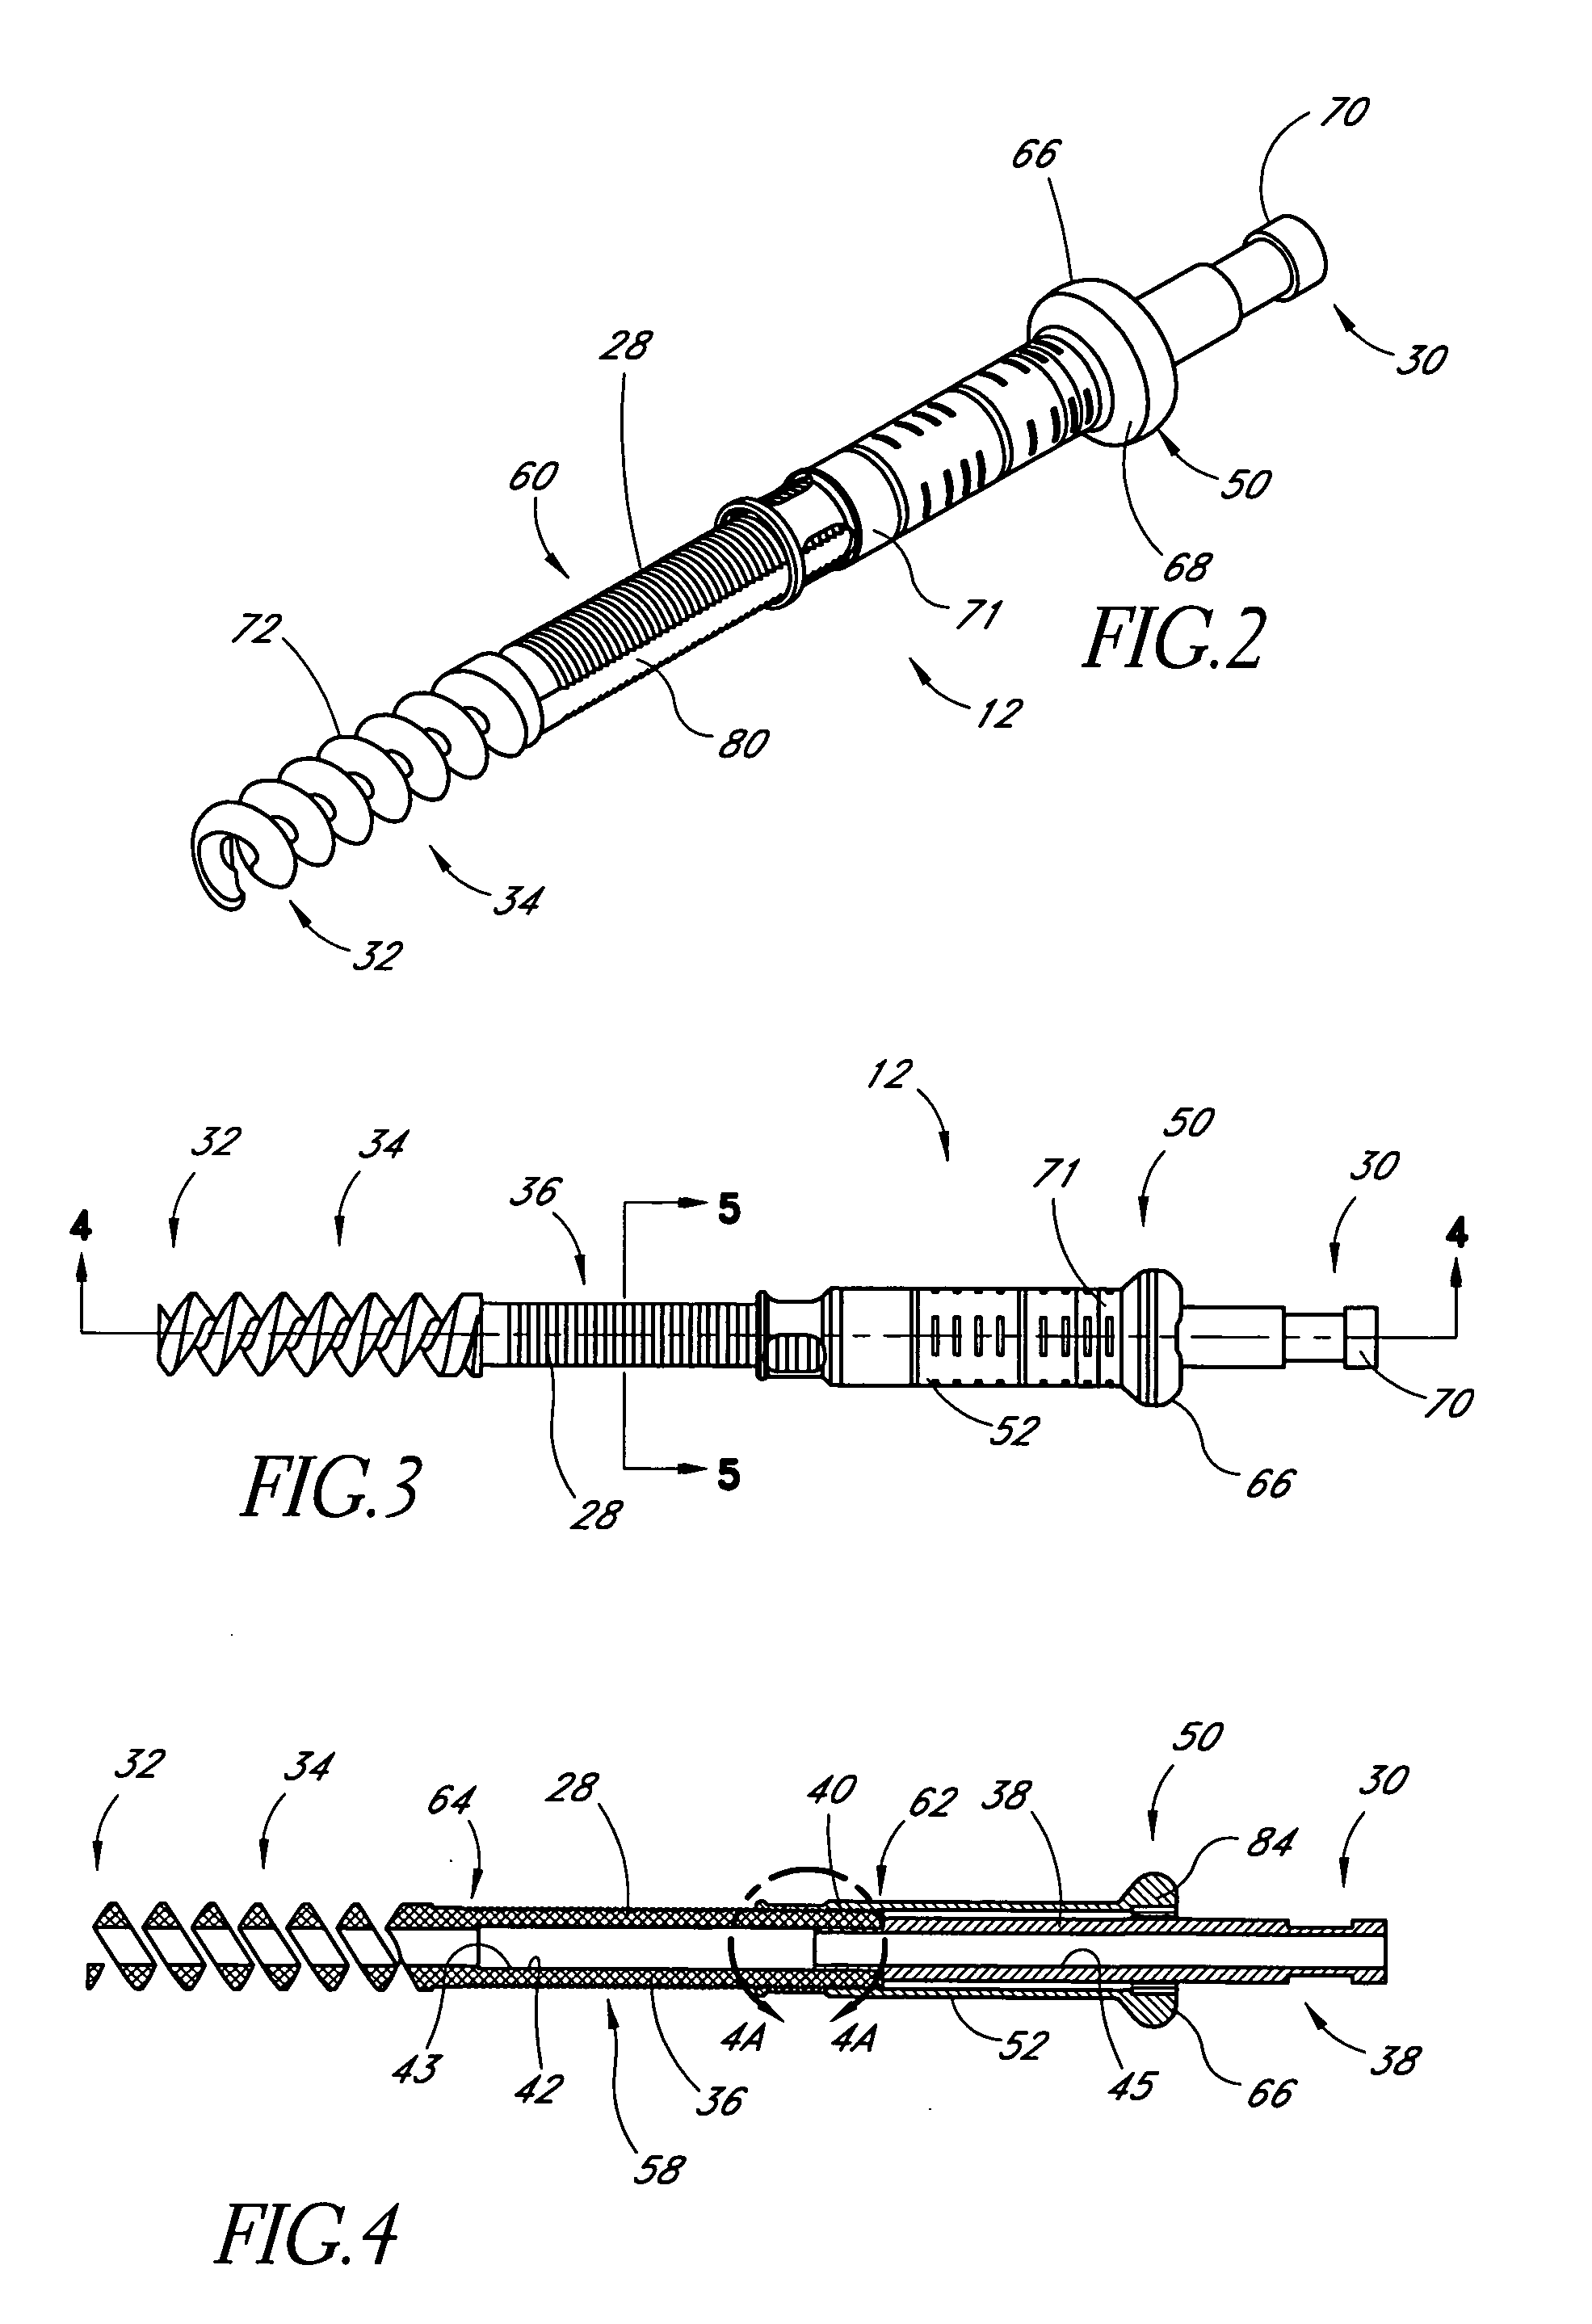 Method and apparatus for delivering an agent